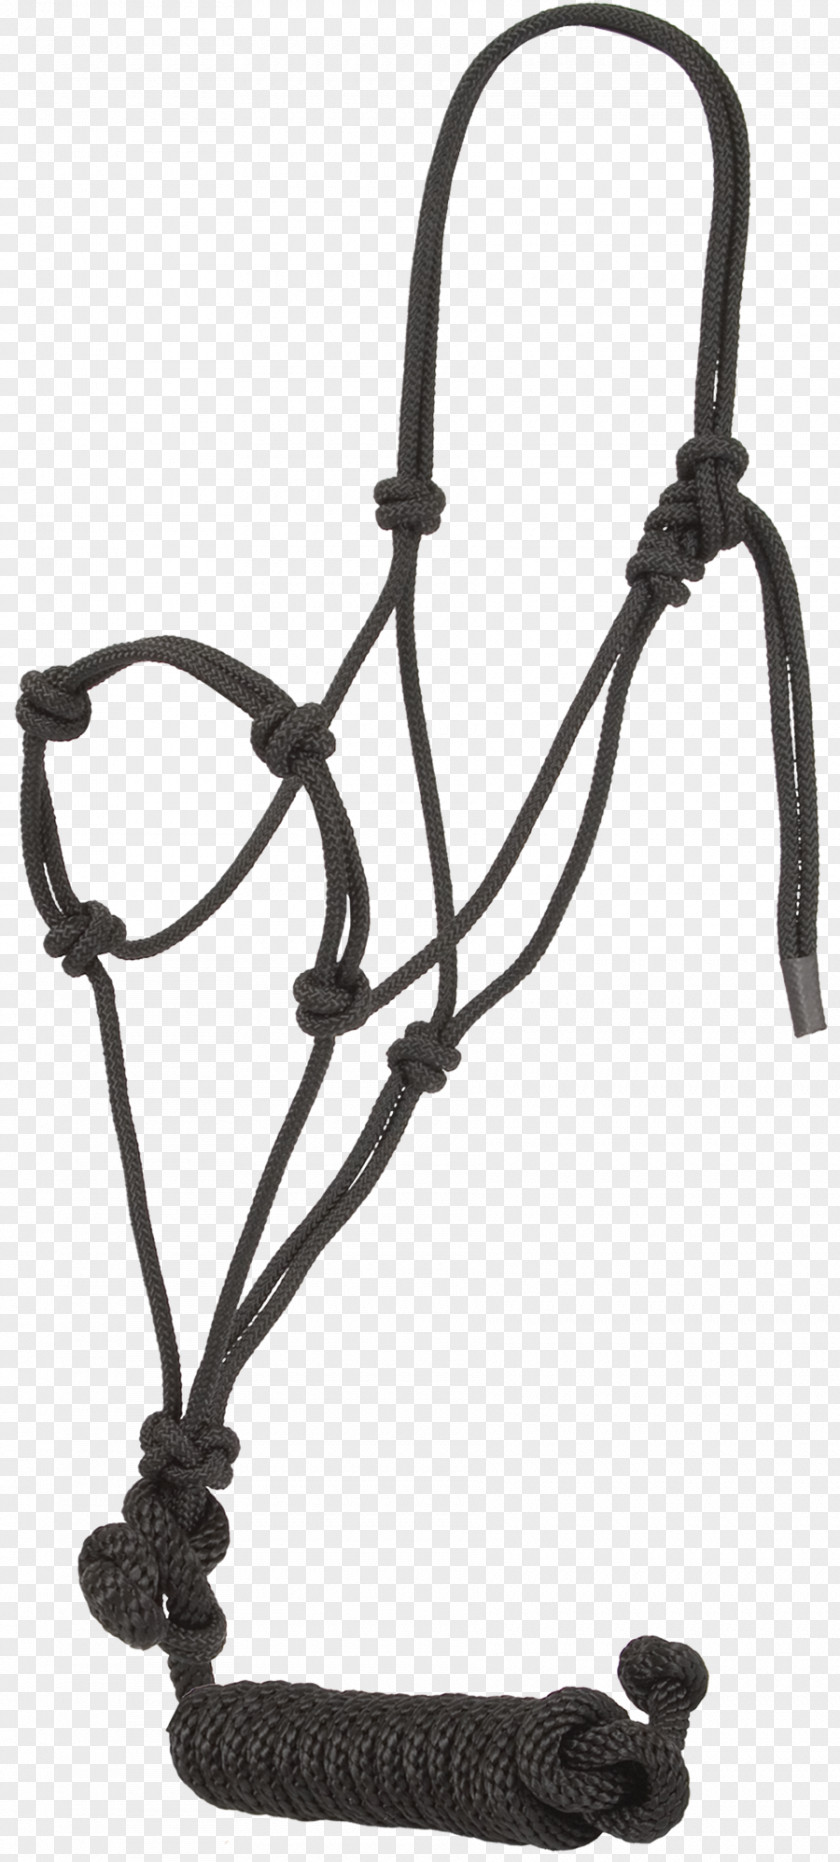 Knotted Rope Mangalarga Marchador Halter Lead Nylon PNG